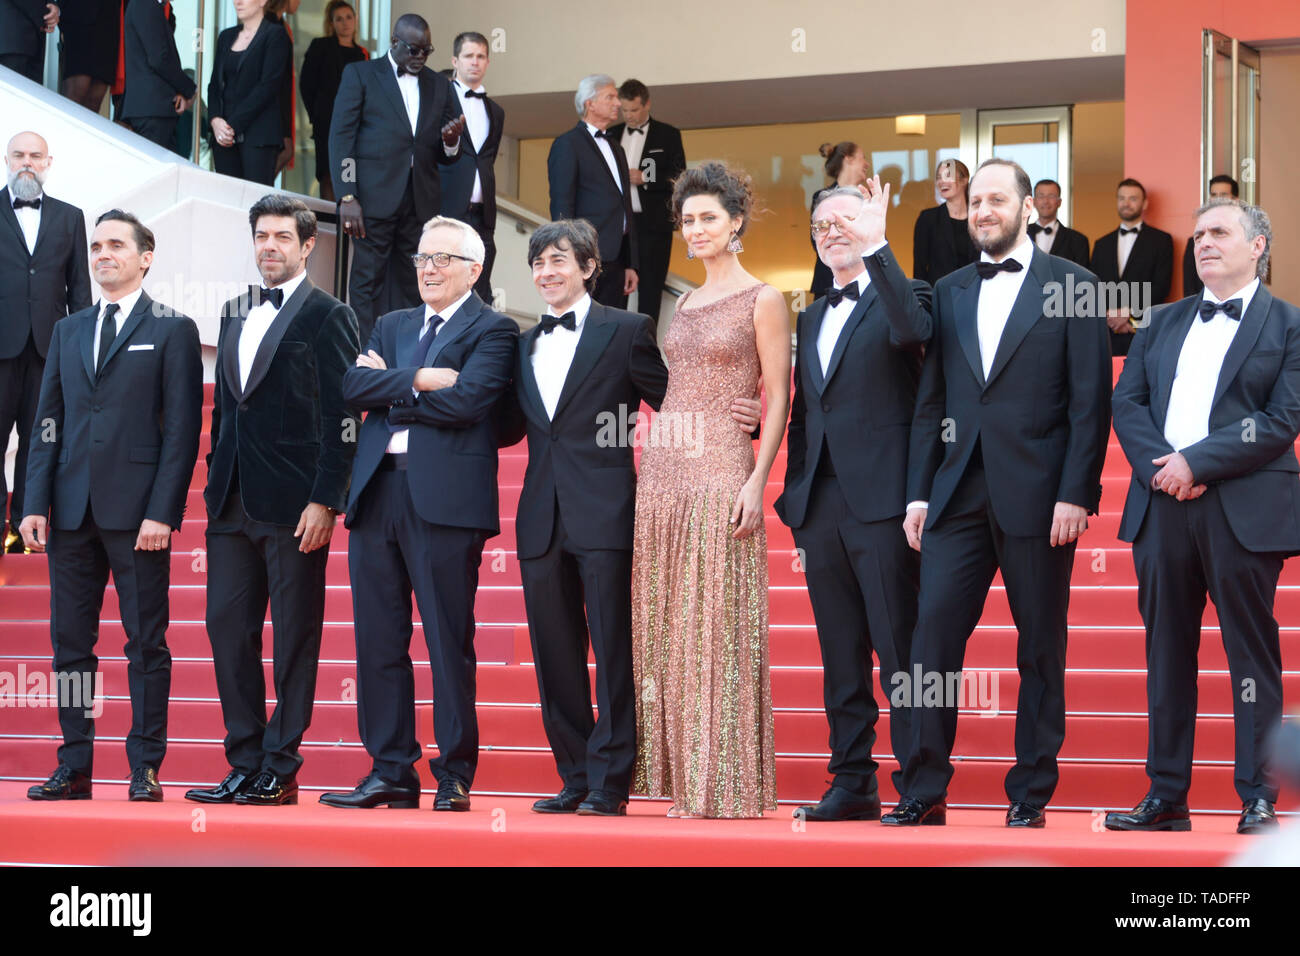 May 23, 2019 - Cannes, France - CANNES, FRANCE - MAY 23: Luigi Lo Cascio, Maria Fernanda Canido, Pierfrancesco Favino, Fausto Russo Alesi, Marco Bellocchio and the cast and crew attend the screening of ''The Traitor'' during the 72nd annual Cannes Film Festival on May 23, 2019 in Cannes, France. (Credit Image: © Frederick InjimbertZUMA Wire) Stock Photo